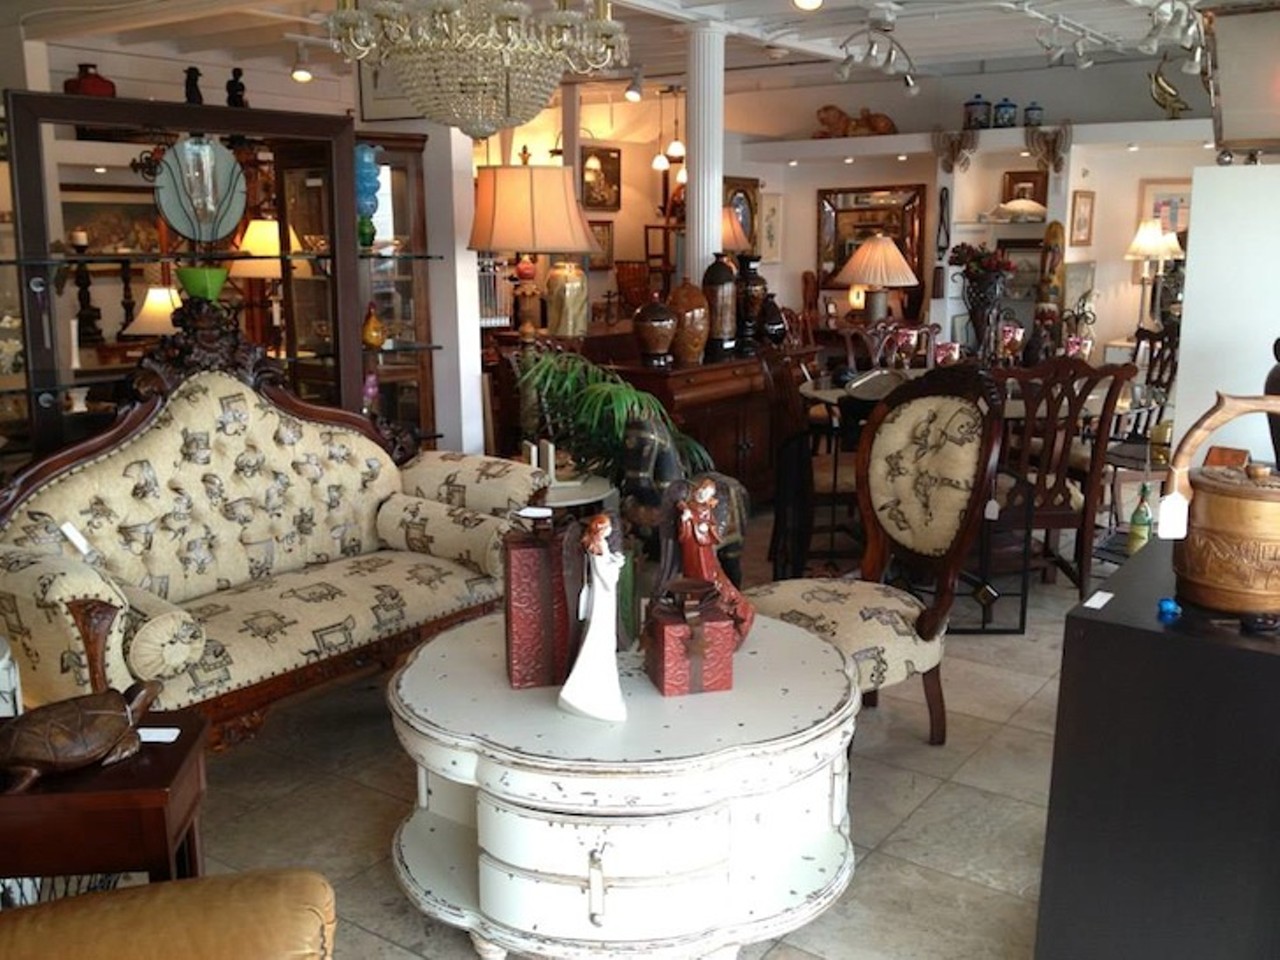 A & T Antiques
1620 N. Orange Ave., Orlando | (407) 896-9831
Have you been searching endlessly for a Bernhardt, Lexington or Ethan Allen side table to add that perfect pop to your living room? A & T offers many of these gently used, high-end items.
Photo via A&T Furniture and Antiques Facebook